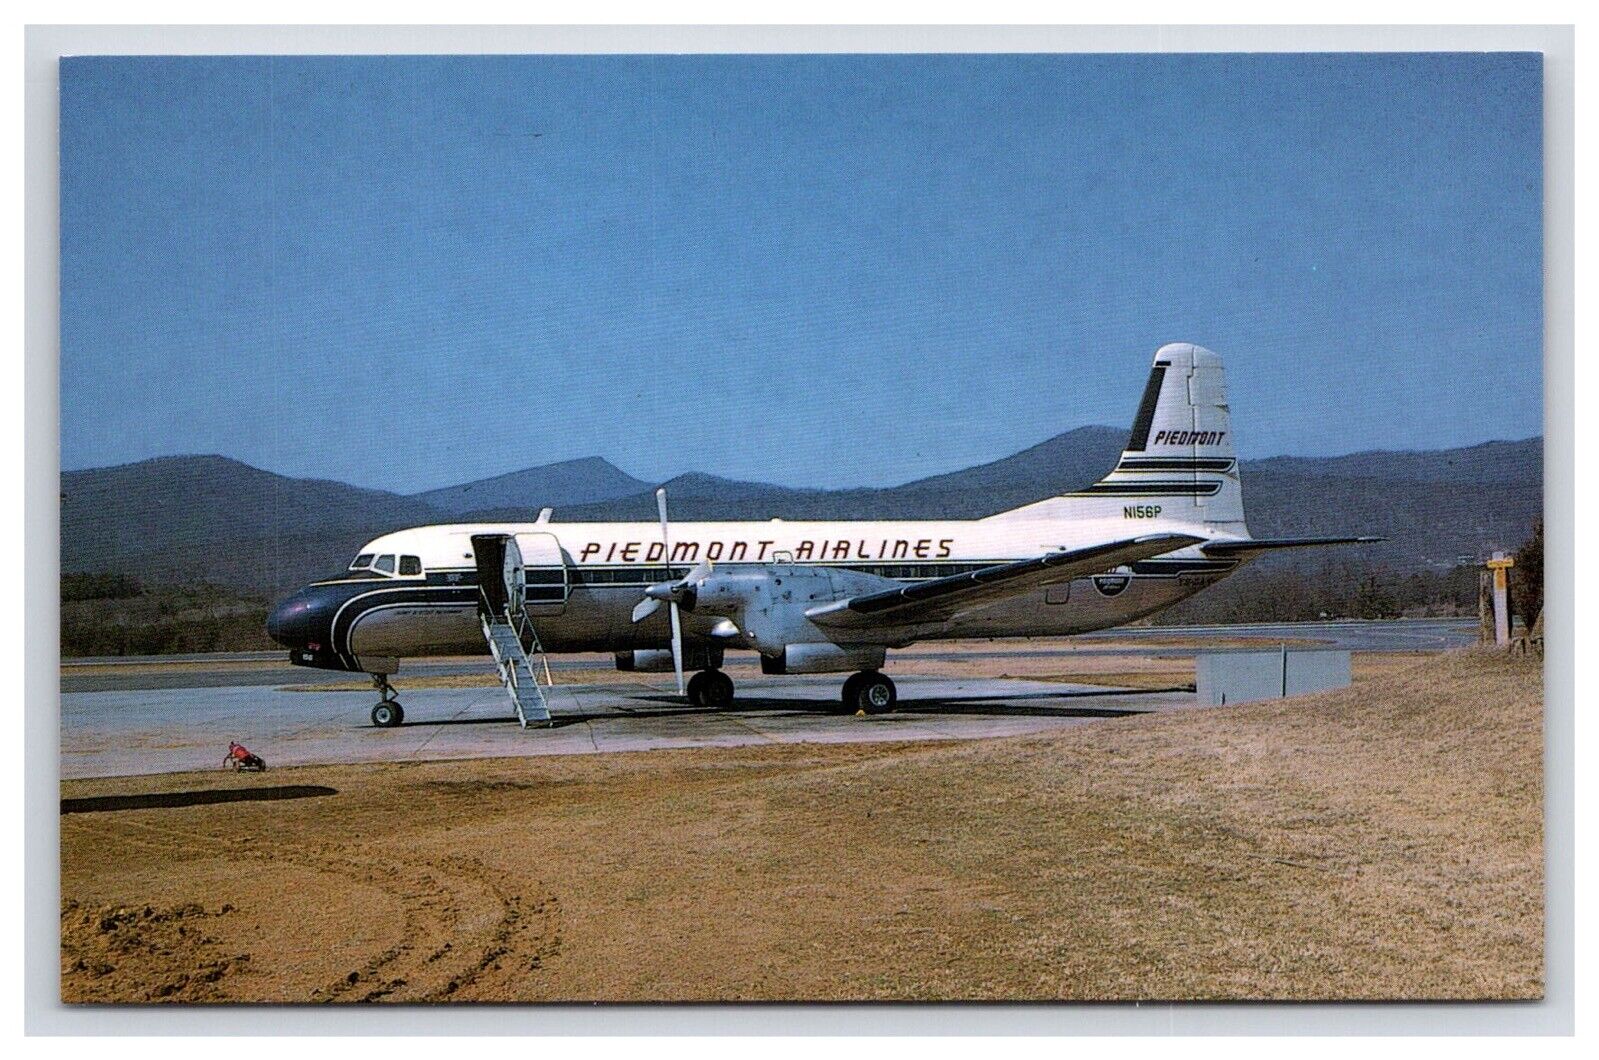 Postcard: Aircraft: 1971 Piedmont Airlines, NAMC YS-11A, N156P - Unposted